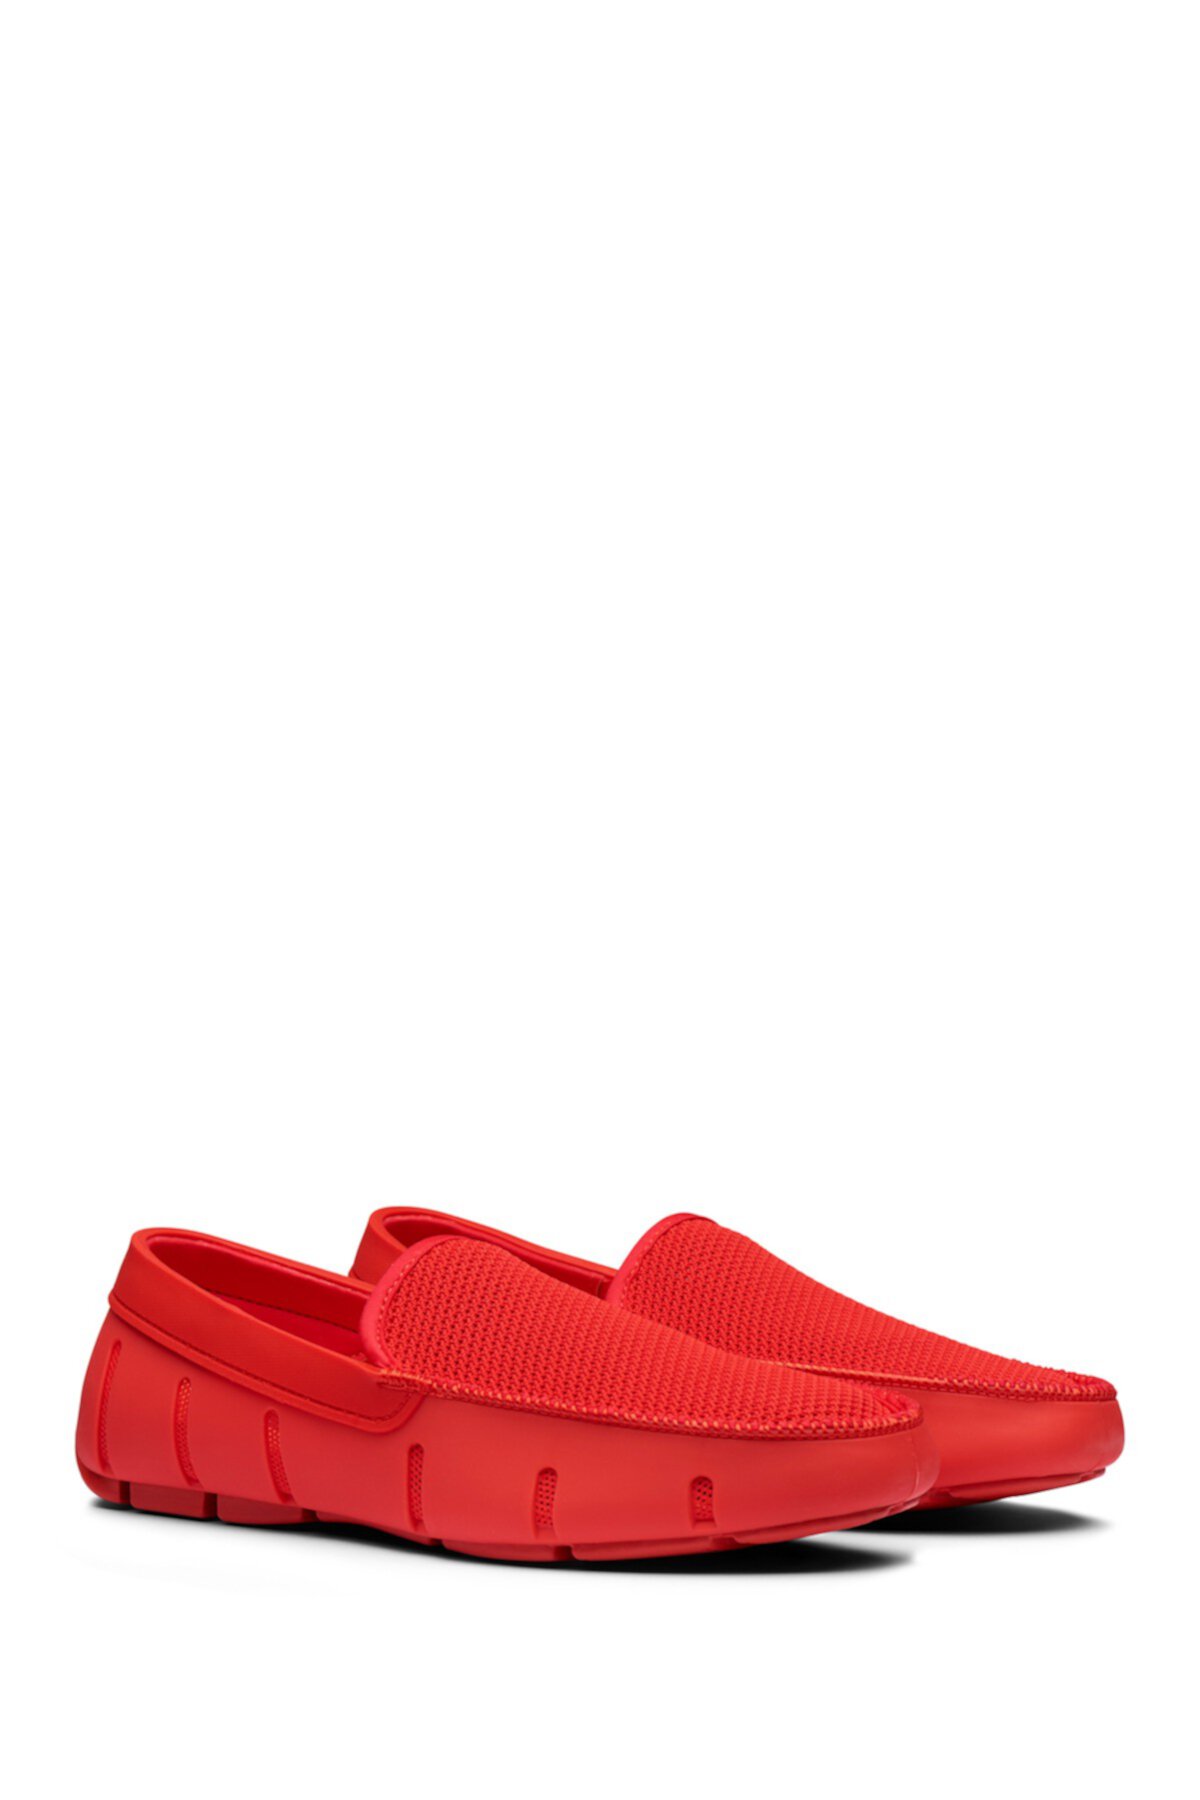 Large Hole Knit Loafer SWIMS